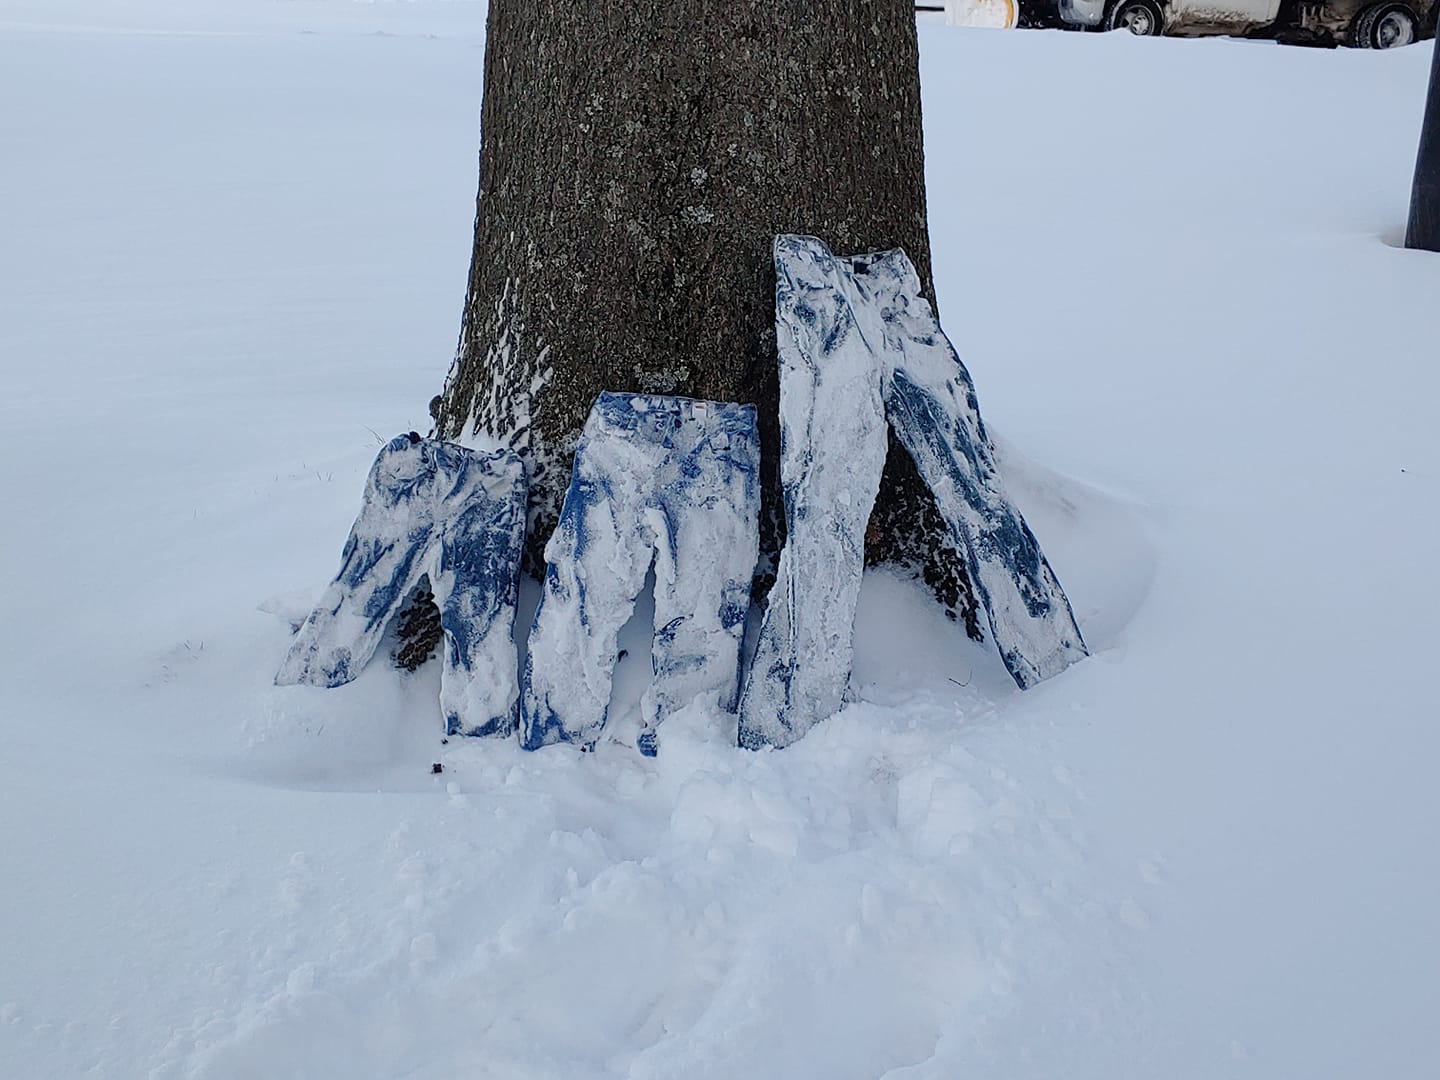 Photo of frozen pants leaning against the base of a tree.